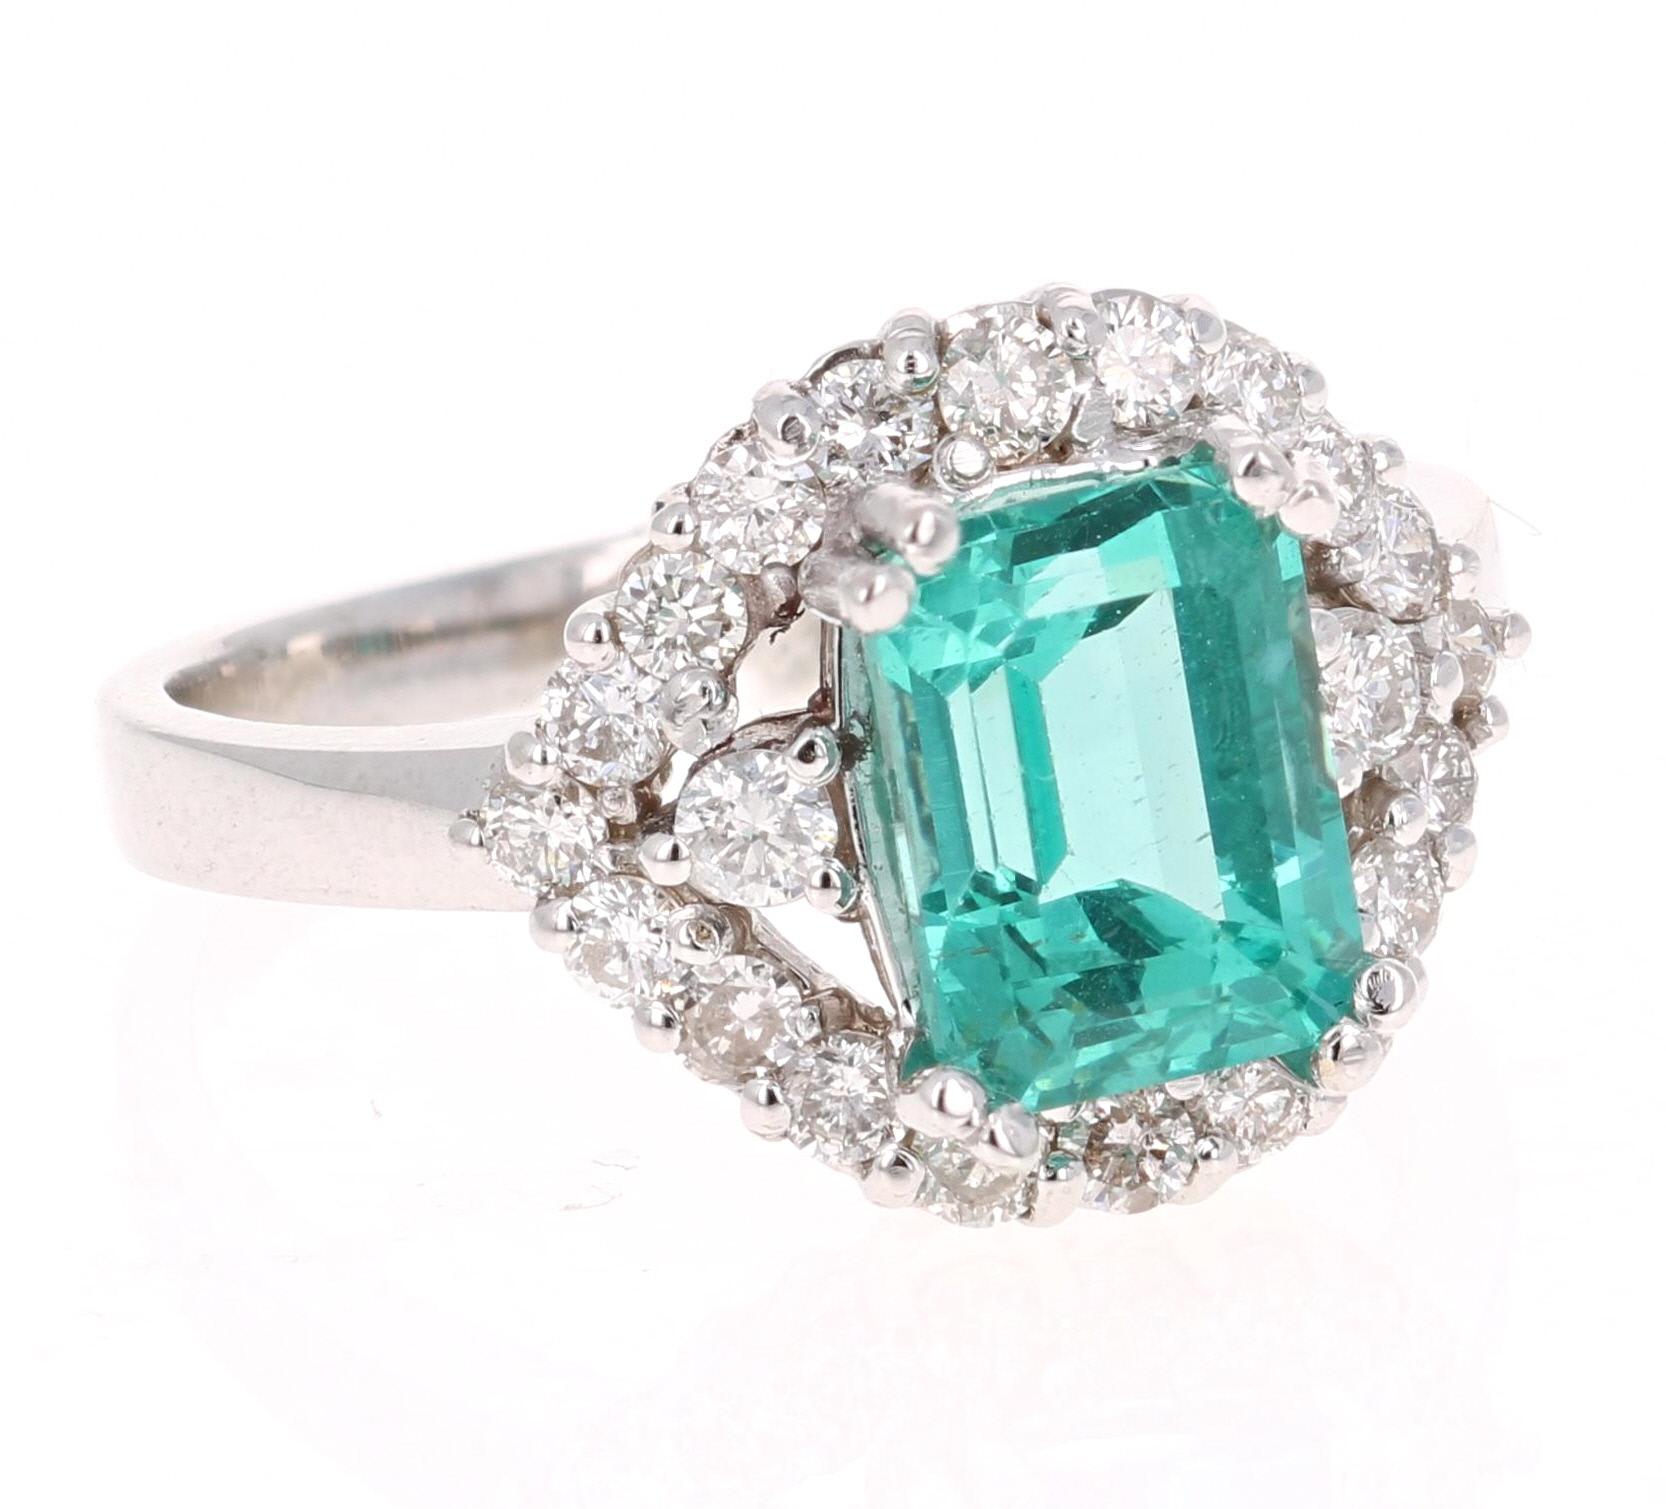 3.34 Carat Emerald Cut Apatite Diamond White Gold Engagement Ring!

Gorgeous Apatite and Diamond Ring.  This ring has a 2.63 carat Emerald-Cut Apatite in the center of the ring and is surrounded by 22 Round Cut Diamonds that weigh 0.71 carat